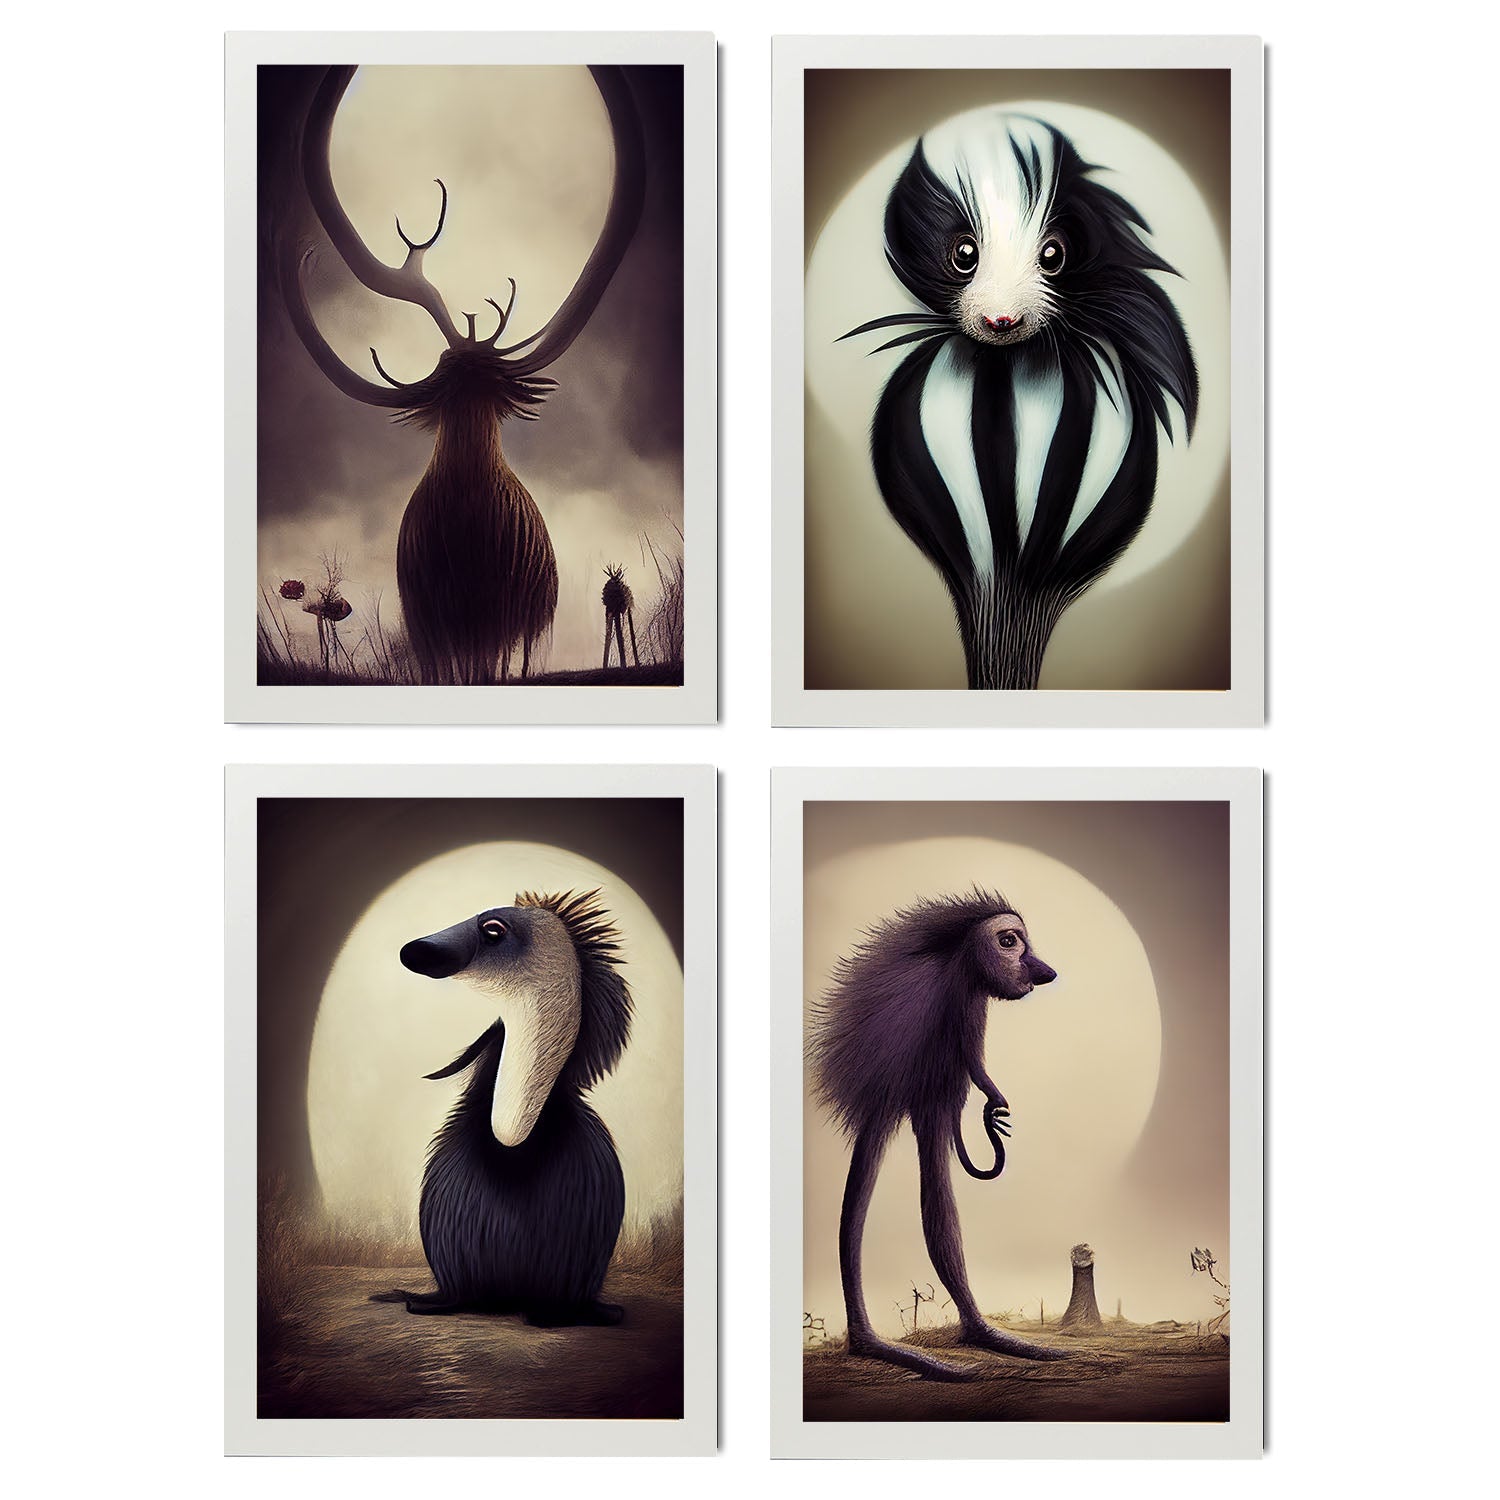 Burton style Animal Illustrations and Posters inspired by Burton's Dark and Goth art Interior Design and Decoration Set Collection 11-Artwork-Nacnic-A4-Marco Blanco-Nacnic Estudio SL